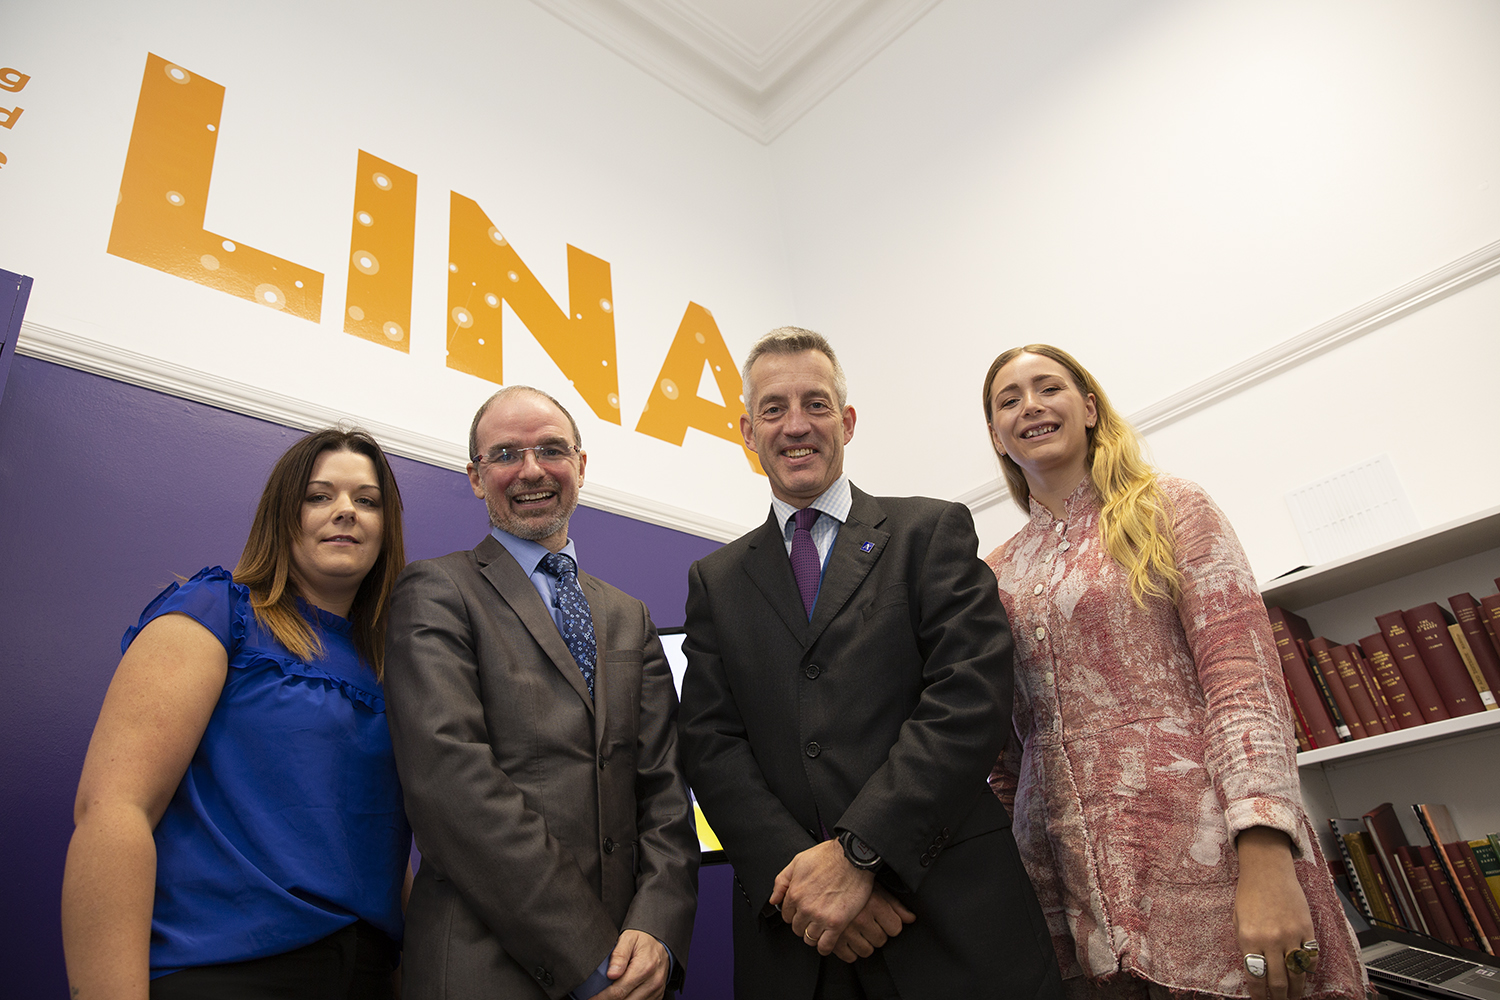 Launching LINA from left: entrepreneur and owner of Diversity Energy Solutions  Tracie Lovie, head of RGU's entrepreneurship and innovation group Chris Moule, Aberdeenshire Council chief executive Jim Savage, and entrepreneur Debbie McLeod, co-founder of Bairns